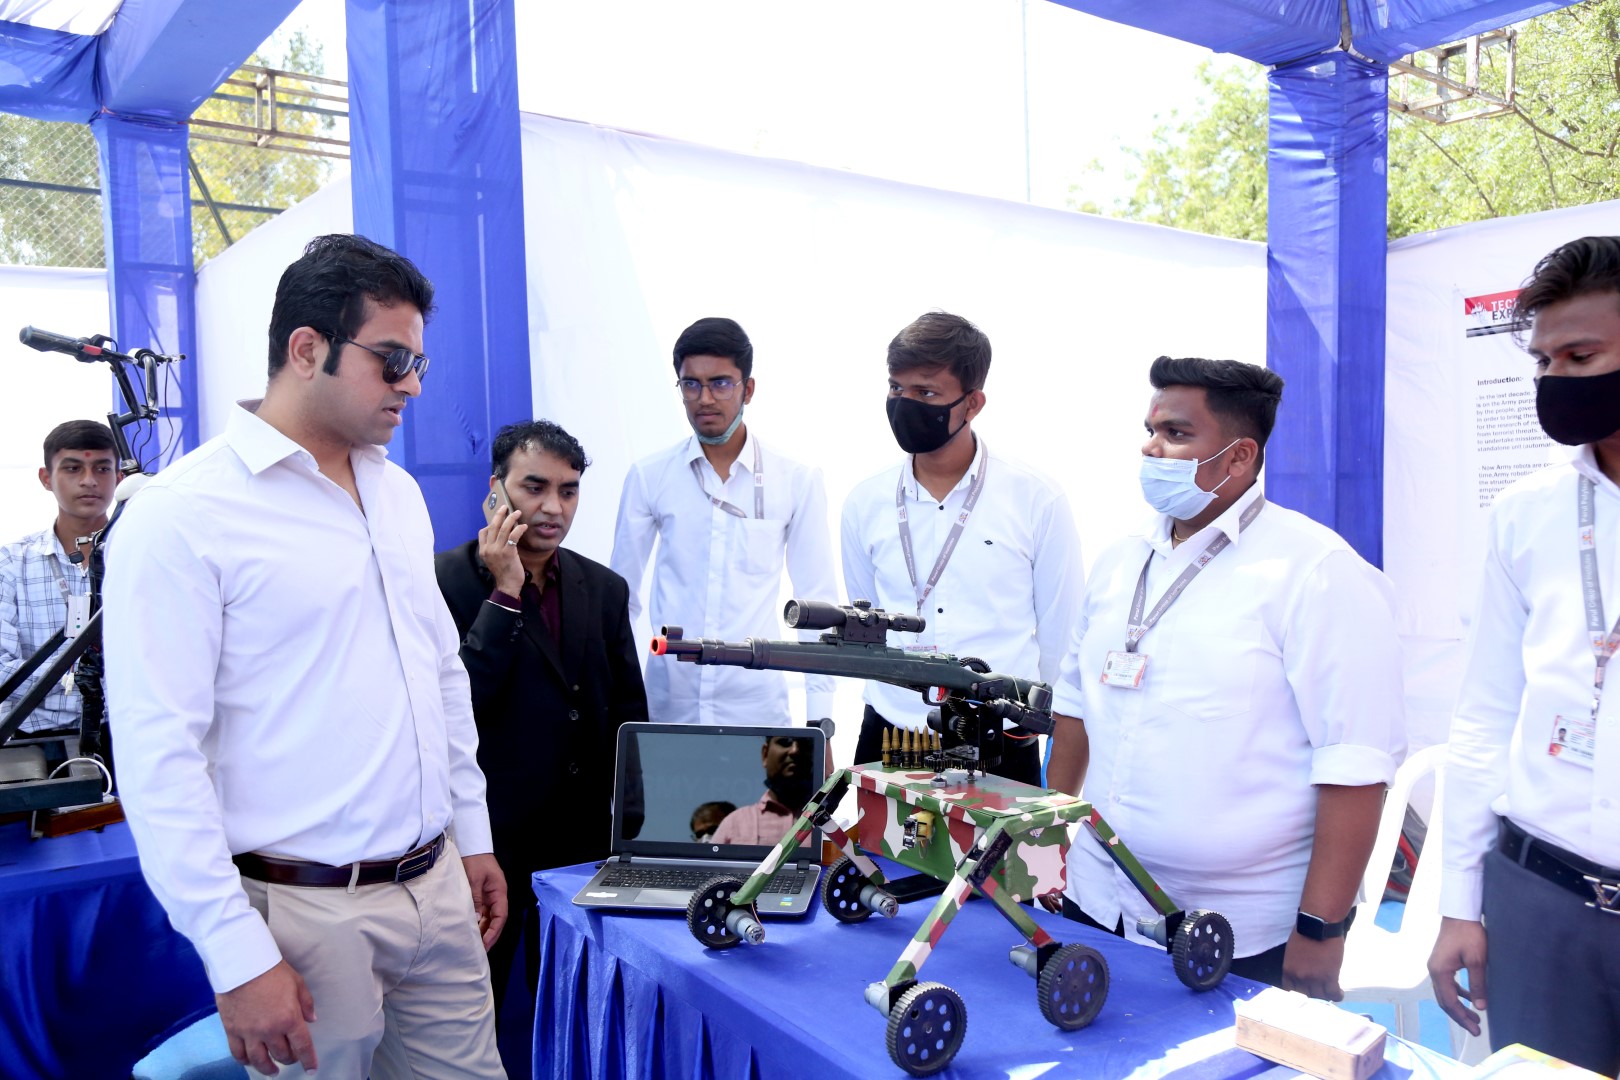 Final Year Students Come Together to Showcase their Innovative Solutions through their Final Projects at the 9th edition of TechExpo.